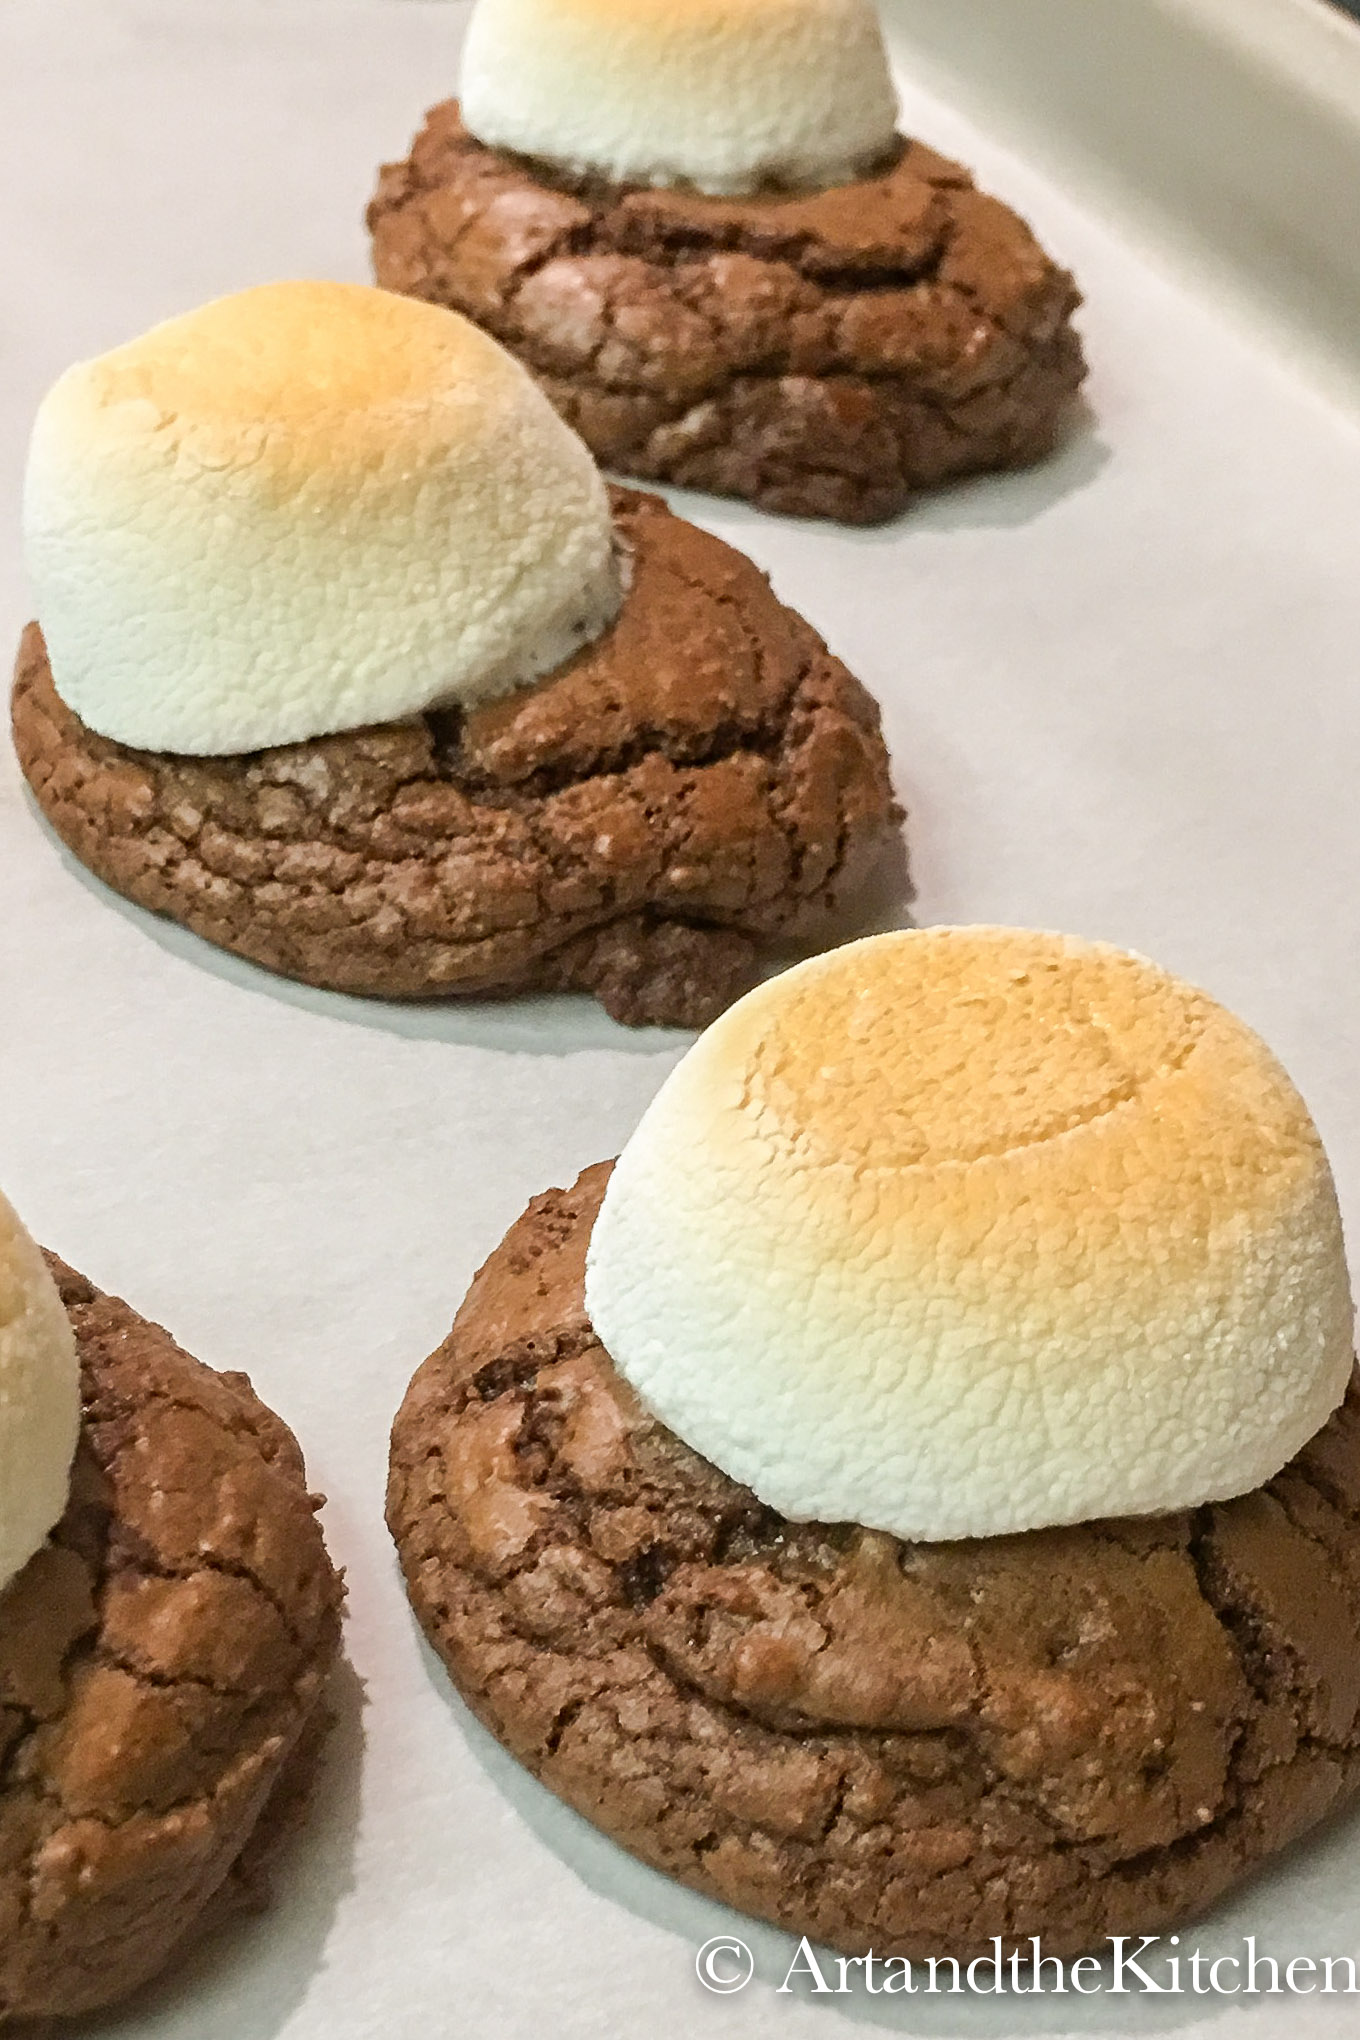 Chocolate cookies with toasted marshmallow on top.